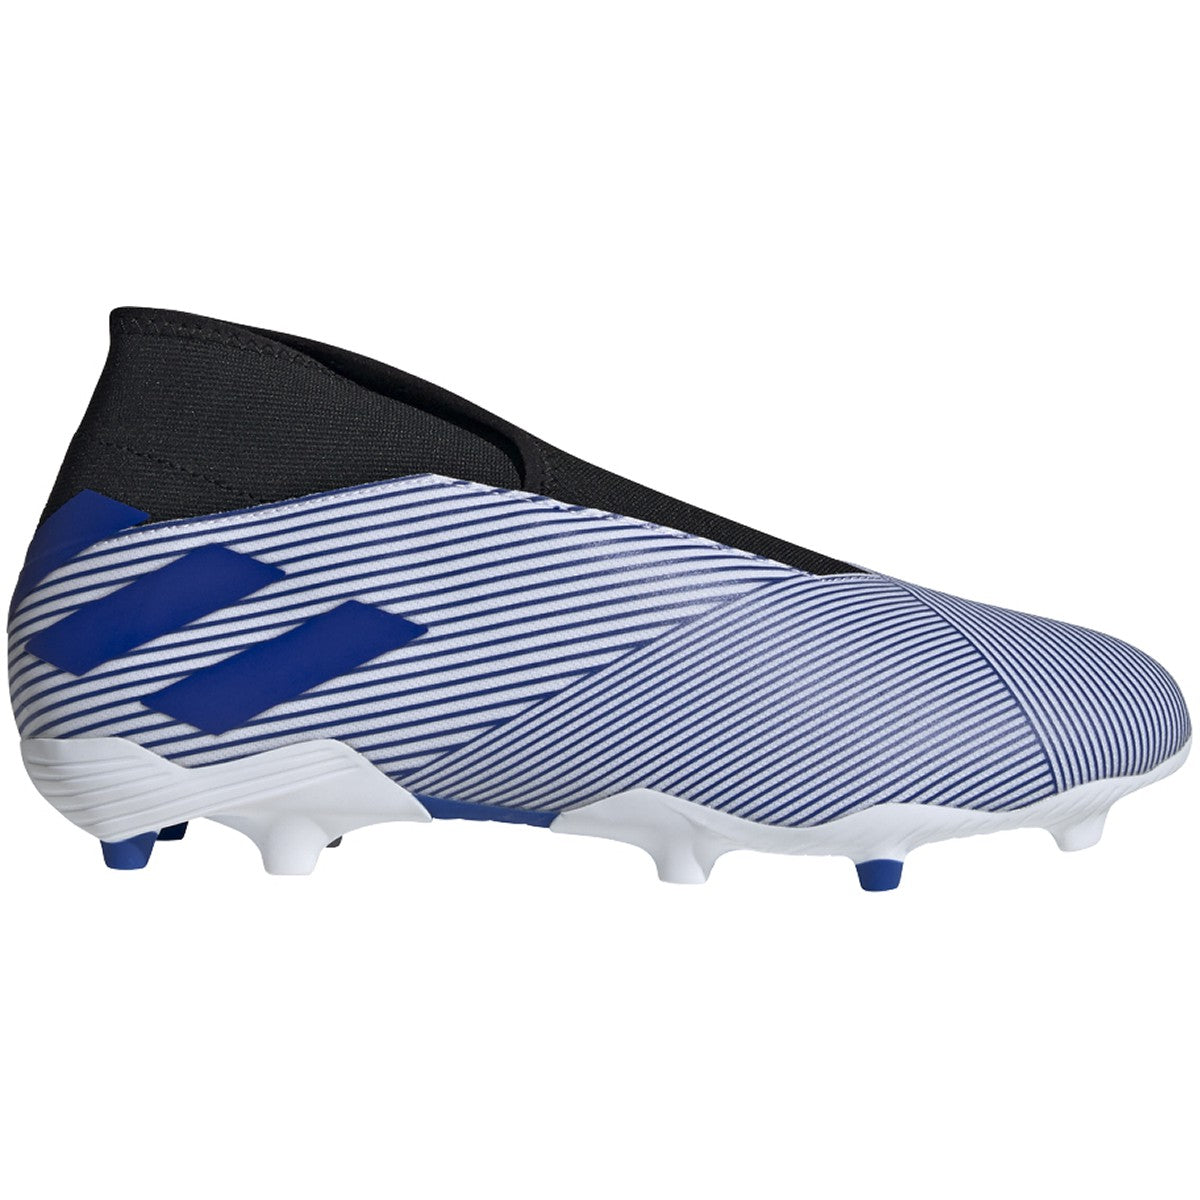 laceless soccer cleats mens